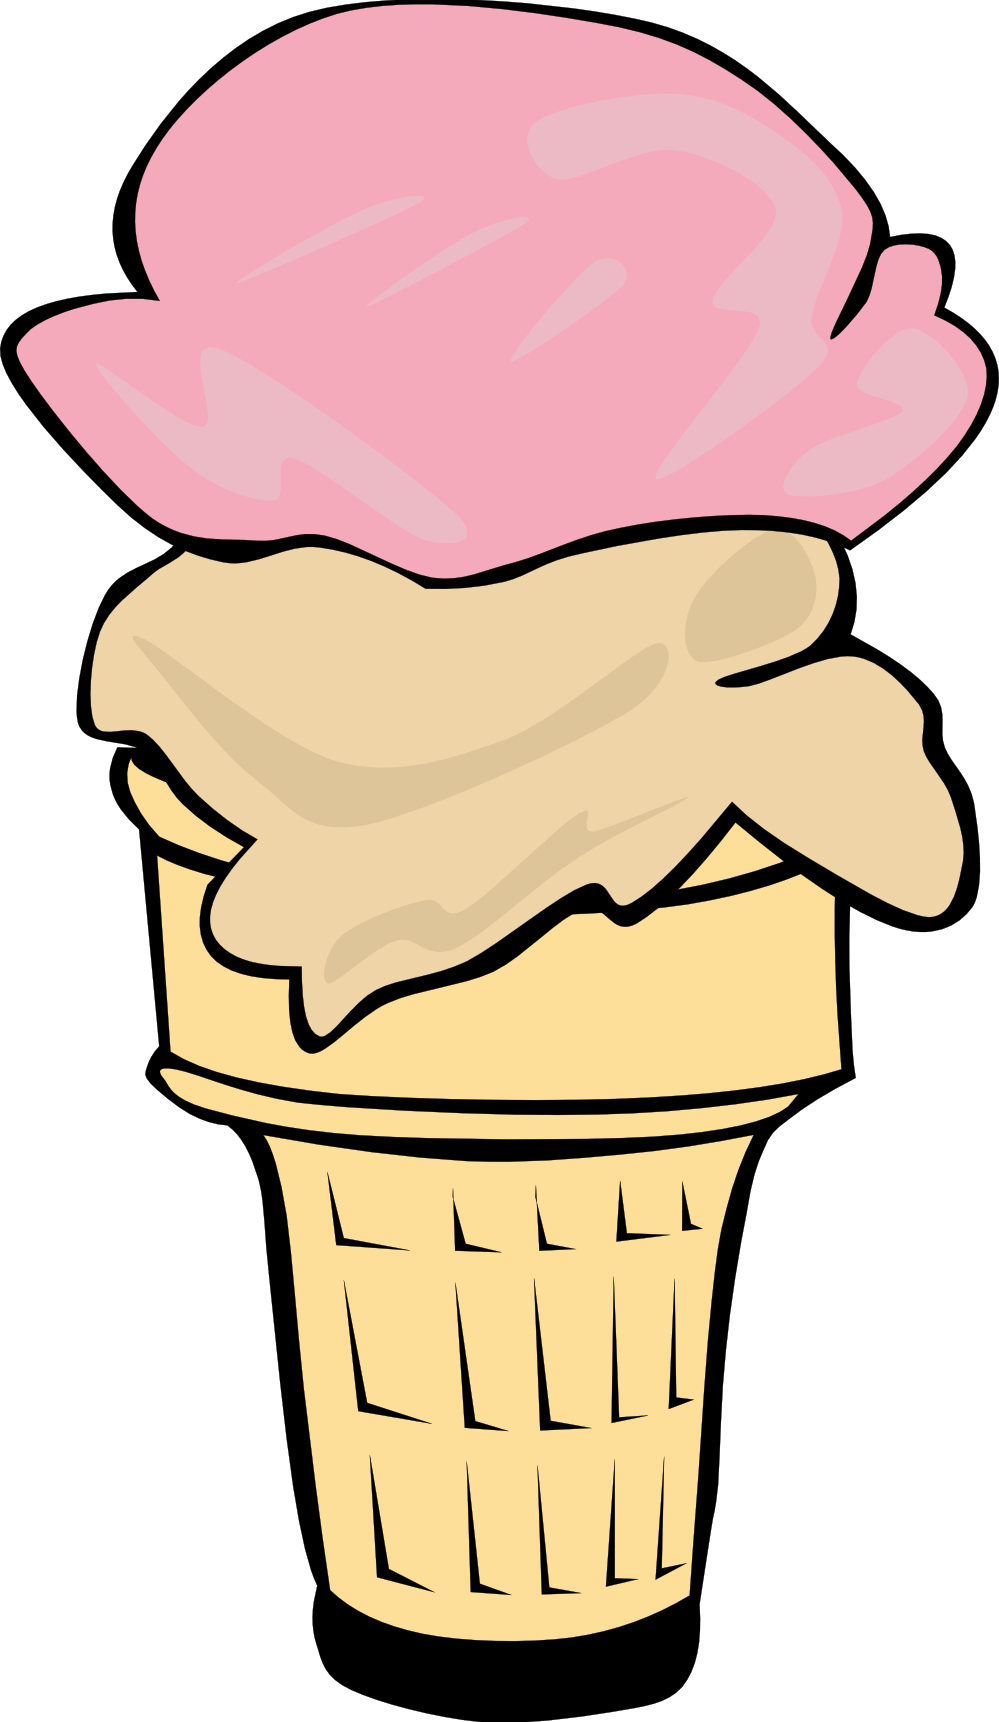 Ice cream scoop clipart no background black and white